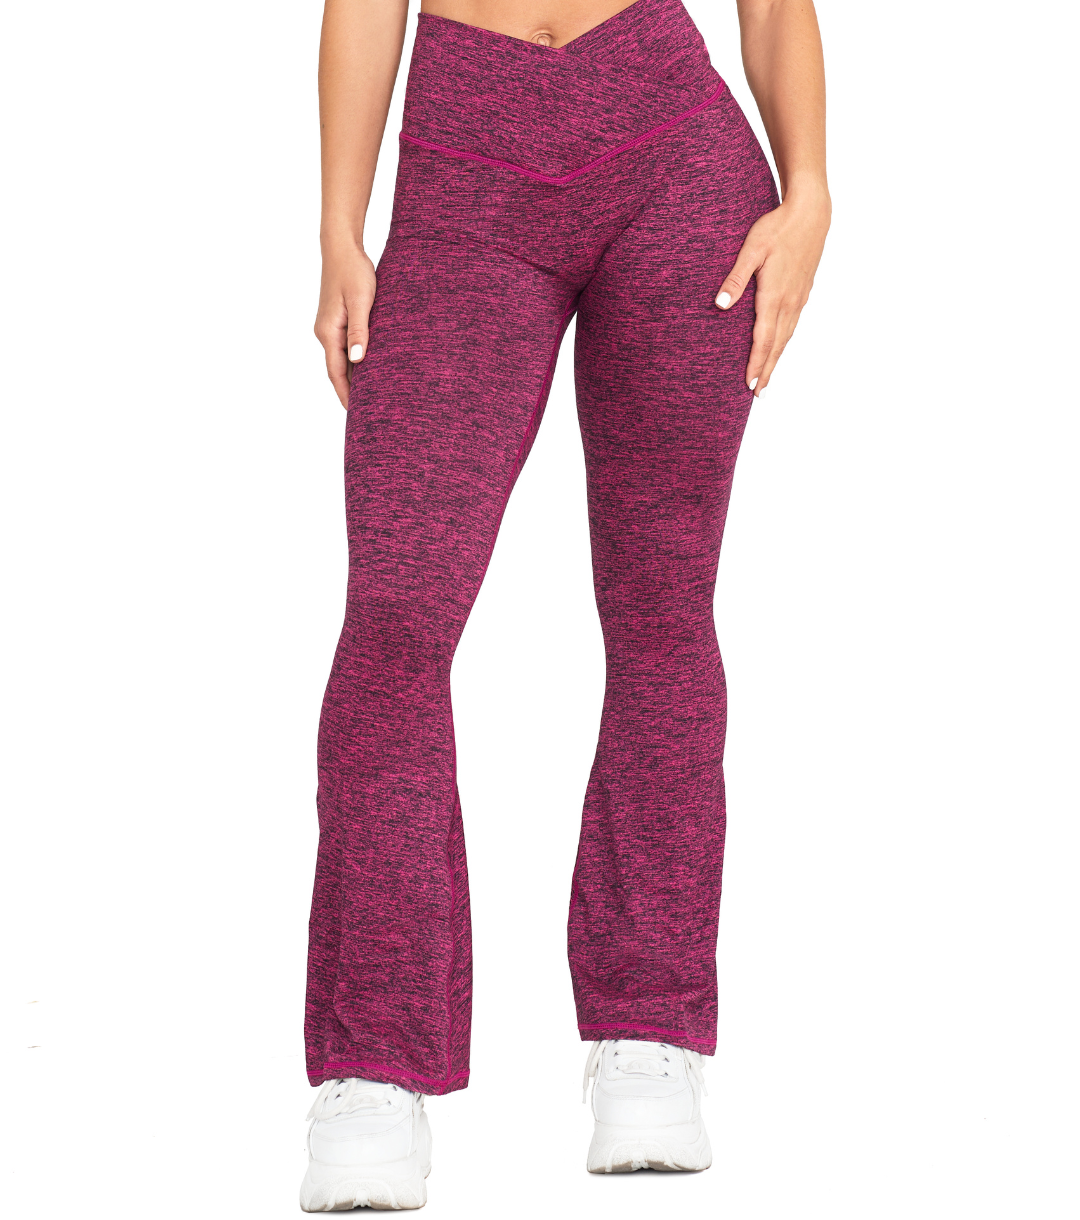 CINCHED CROSS OVER FLARE LEGGINGS